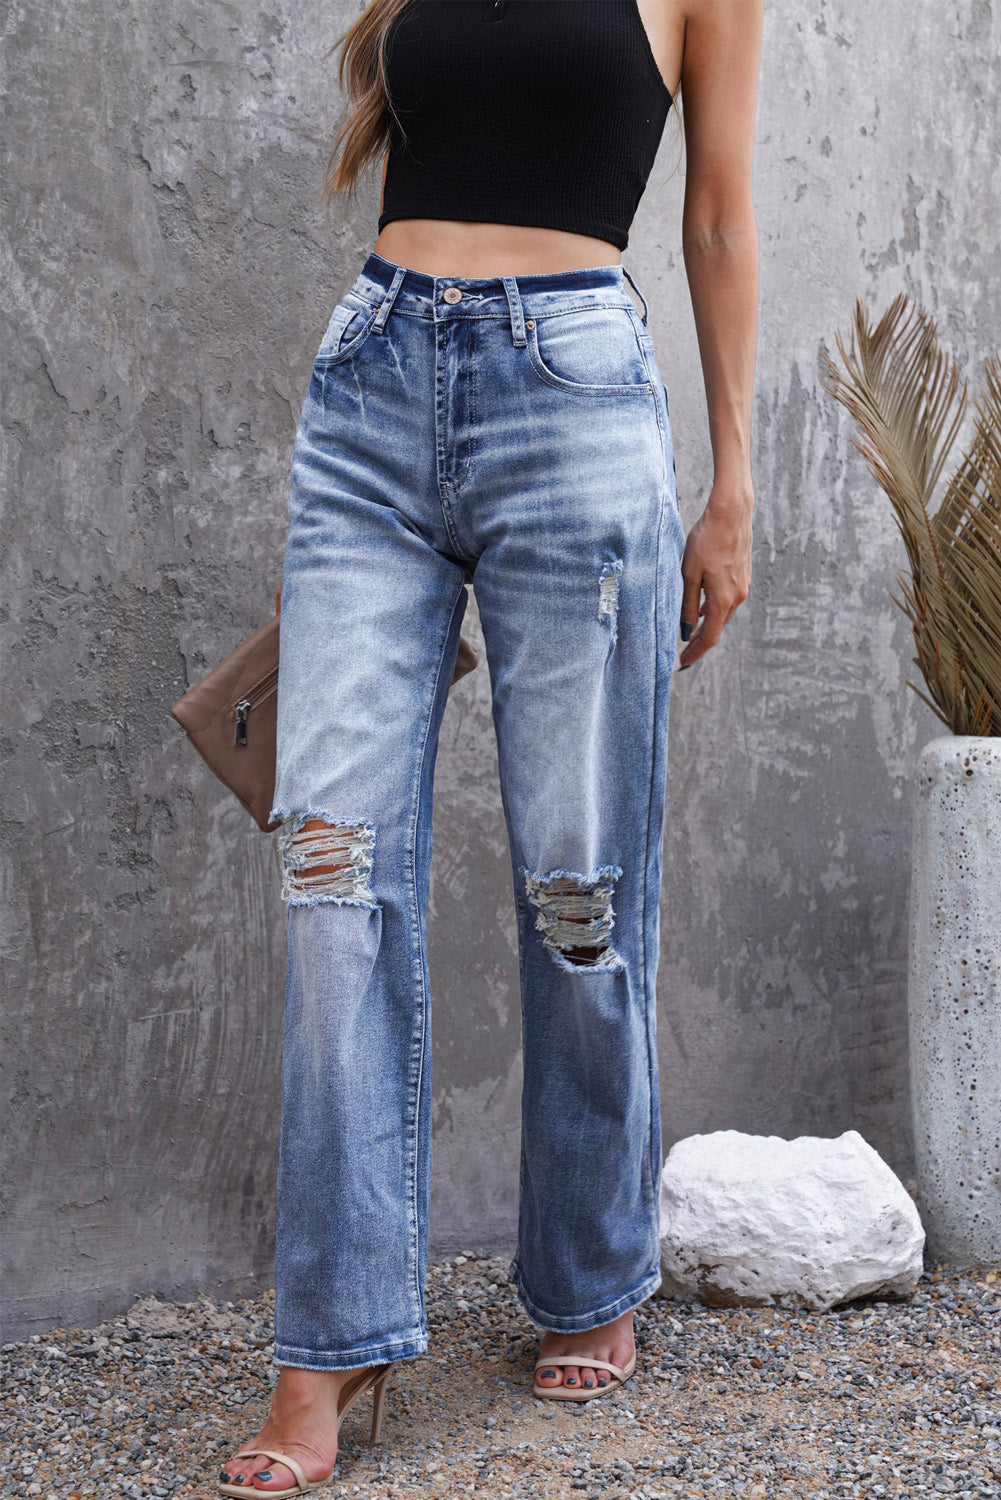 Blue High Waist Distressed Ripped Hole Flare Jeans